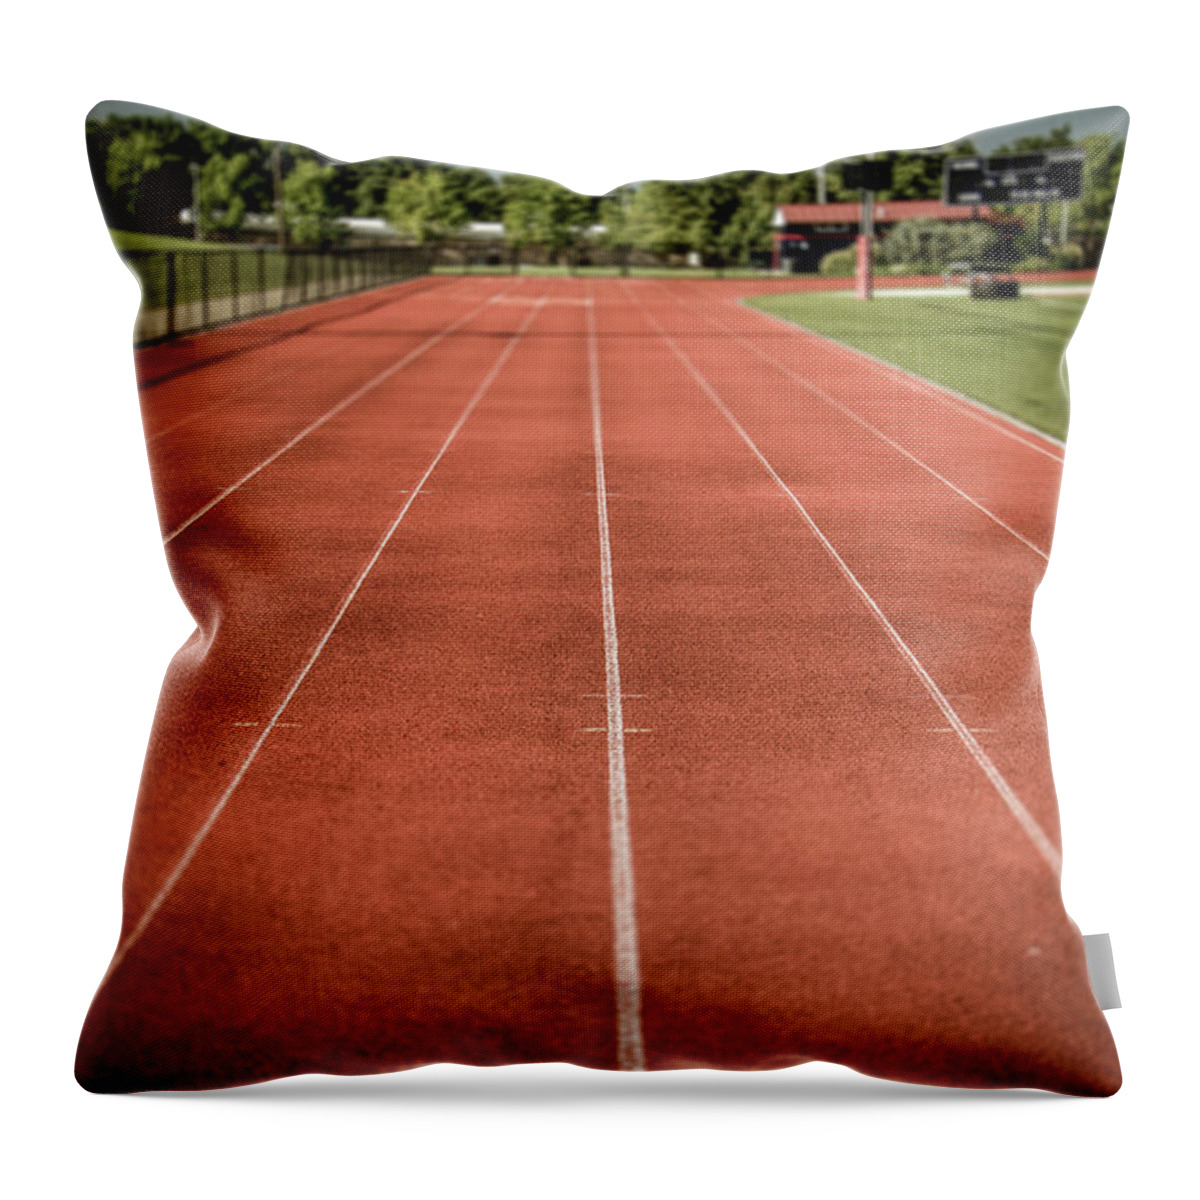 This Is A Photo I Took At My High School In Plymouth Whitemarsh Pennsylvania . Plymouth Whitemarsh High School Track And Field With Some Added Depth Of Field With A Process Called Tilt-shift Giving The Effect Of Depth. Throw Pillow featuring the photograph Track and Field Of Depth One by Howard Roberts